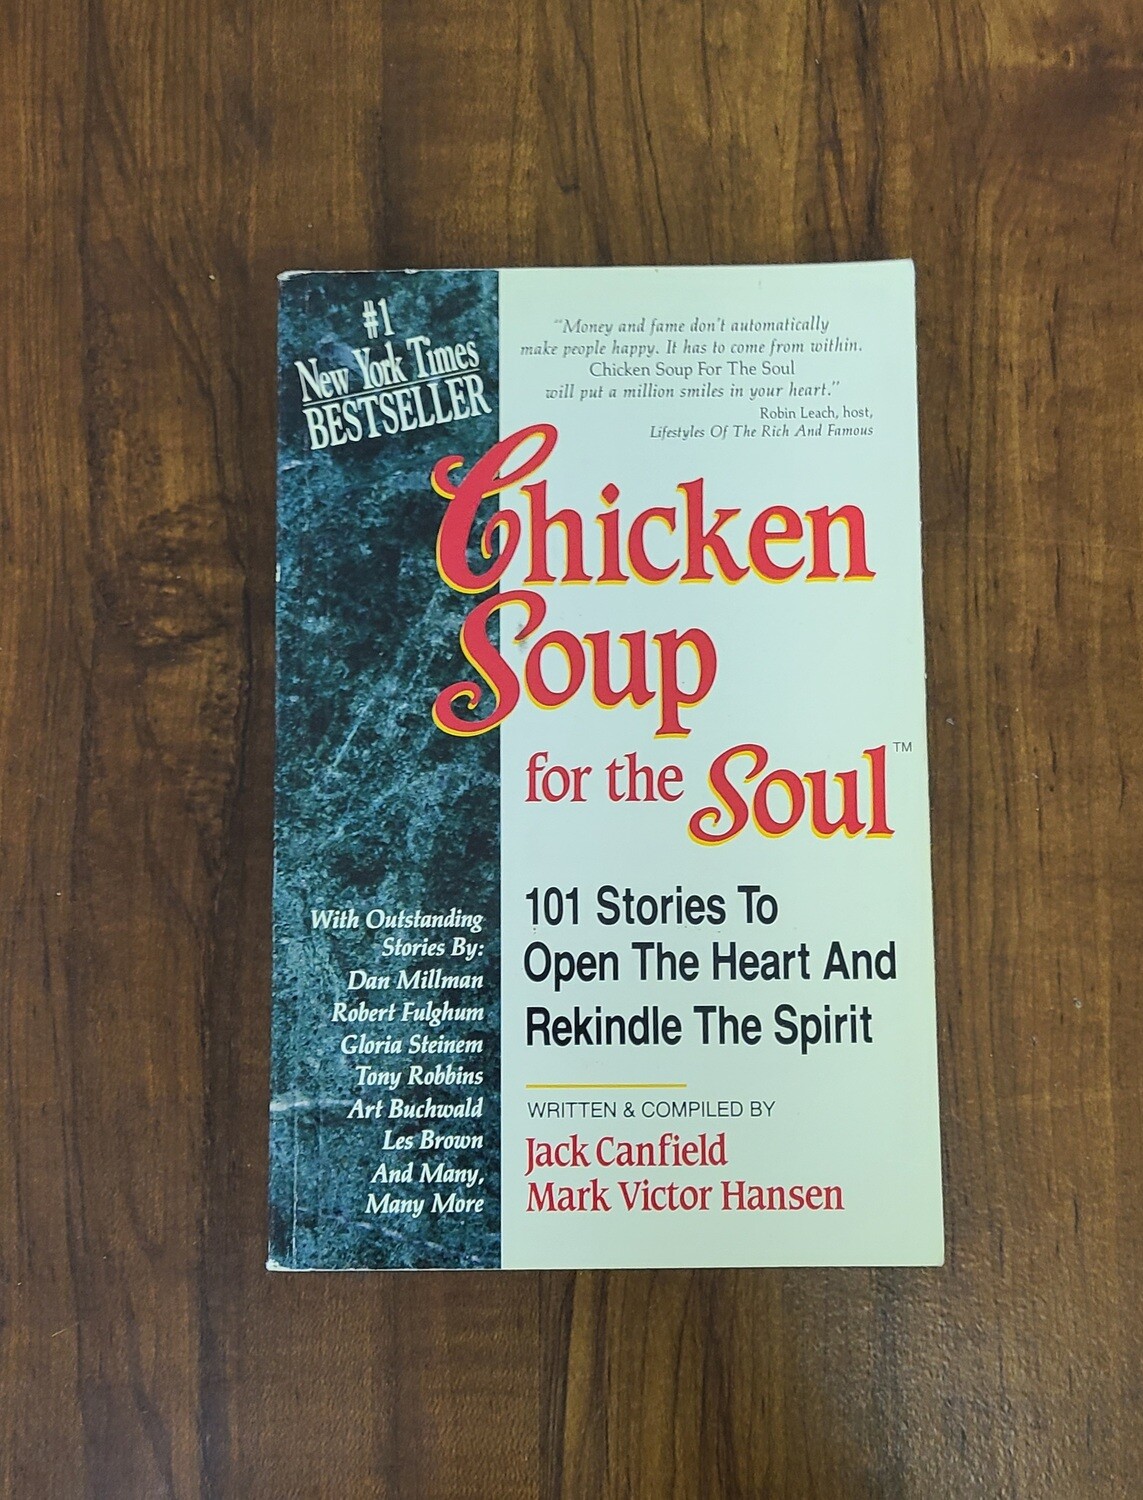 Chicken Soup for the Soul by Jack Canfield and Mark Victor Hansen